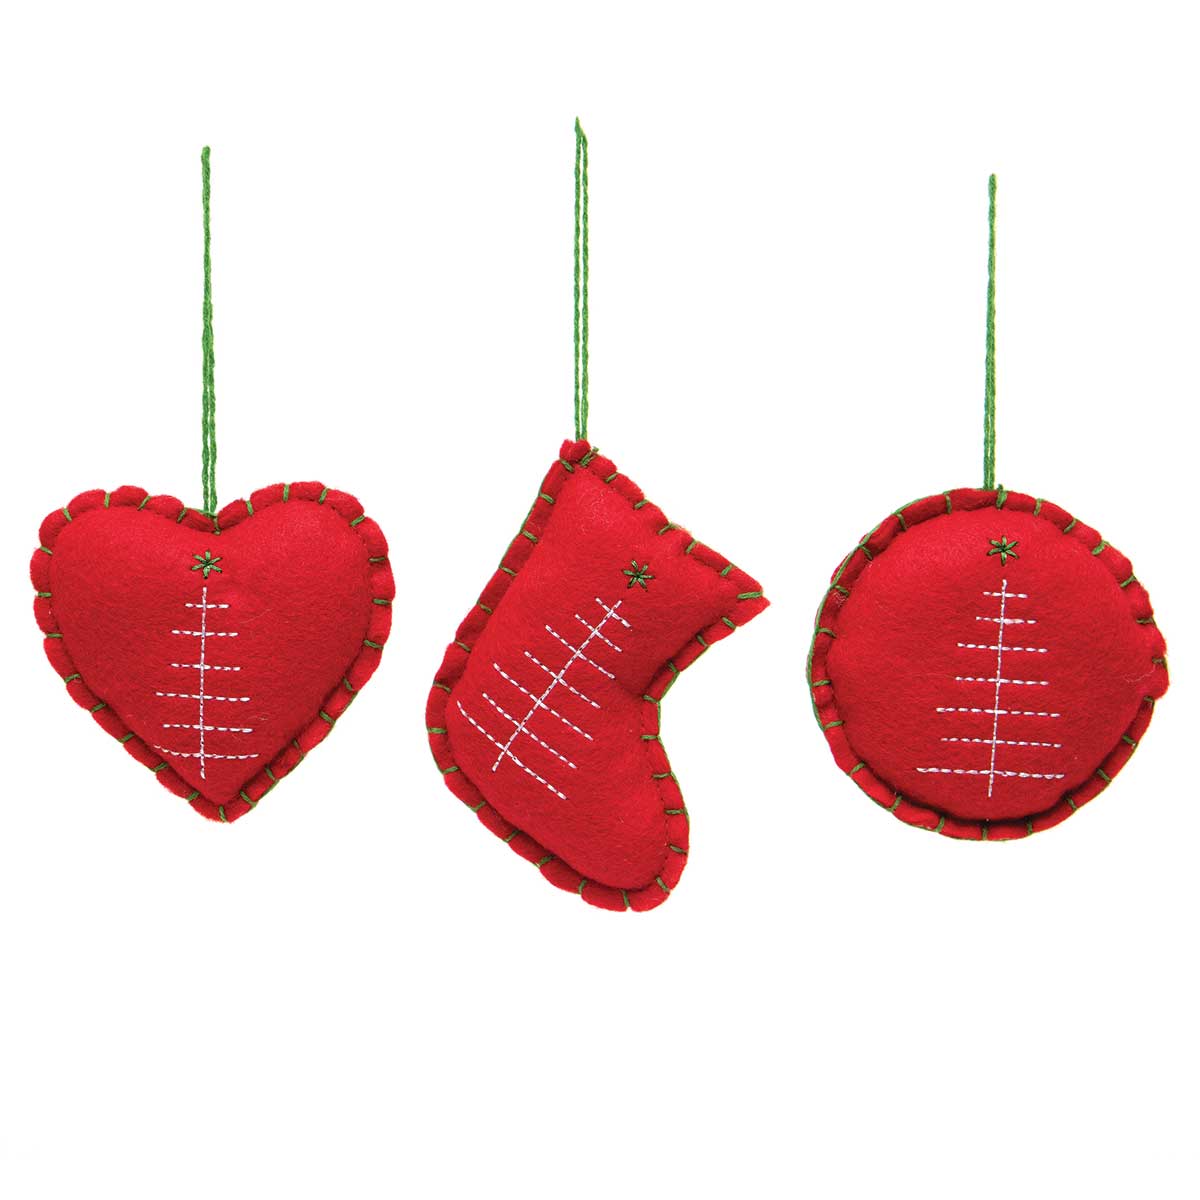 v22 ORNAMENT PLUSH 3 ASSORTED 4IN X 1IN X 4IN POLYESTER